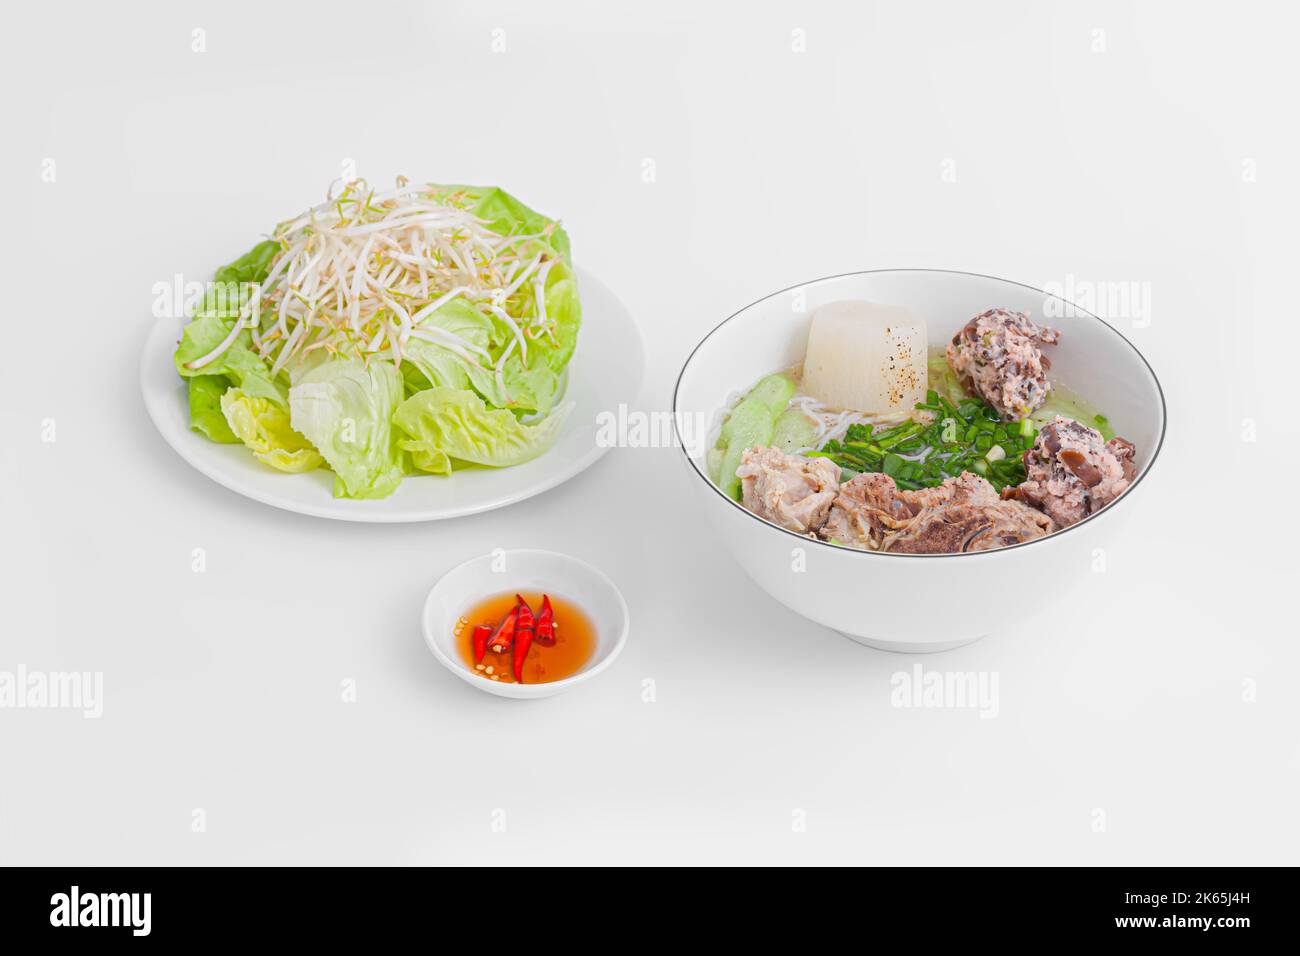 Bun Moc, Rice noodle soup with pork ball, Vietnamese food isolated on white background, perspective view Stock Photo